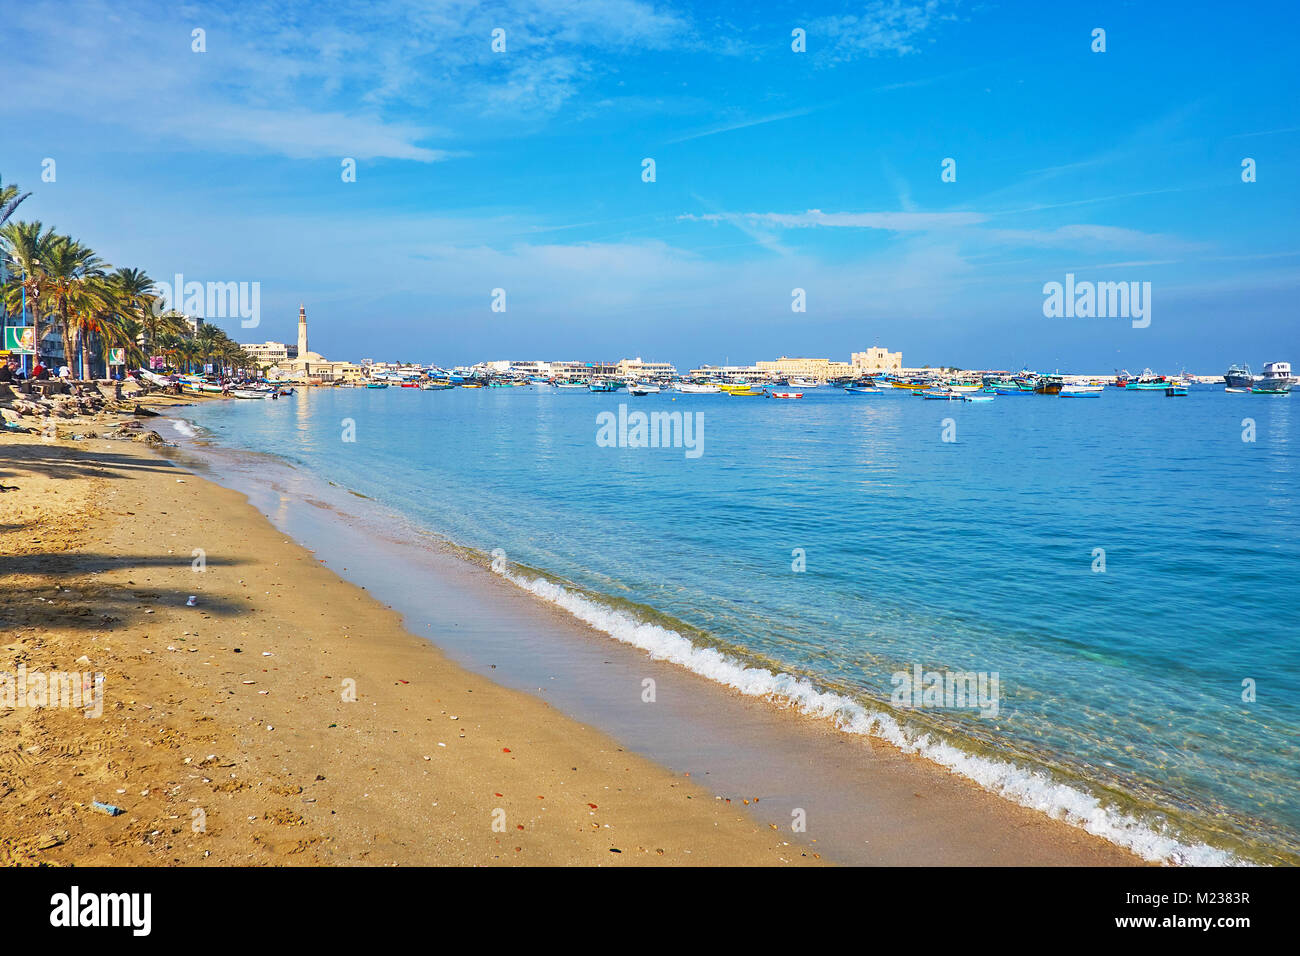 ALEXANDRIA, EGYPT - DECEMBER 17, 2017: The walk along the sea with aview on numerous fishing boats in Eastern harbor, Manar El Islam Mosque and Qaitba Stock Photo